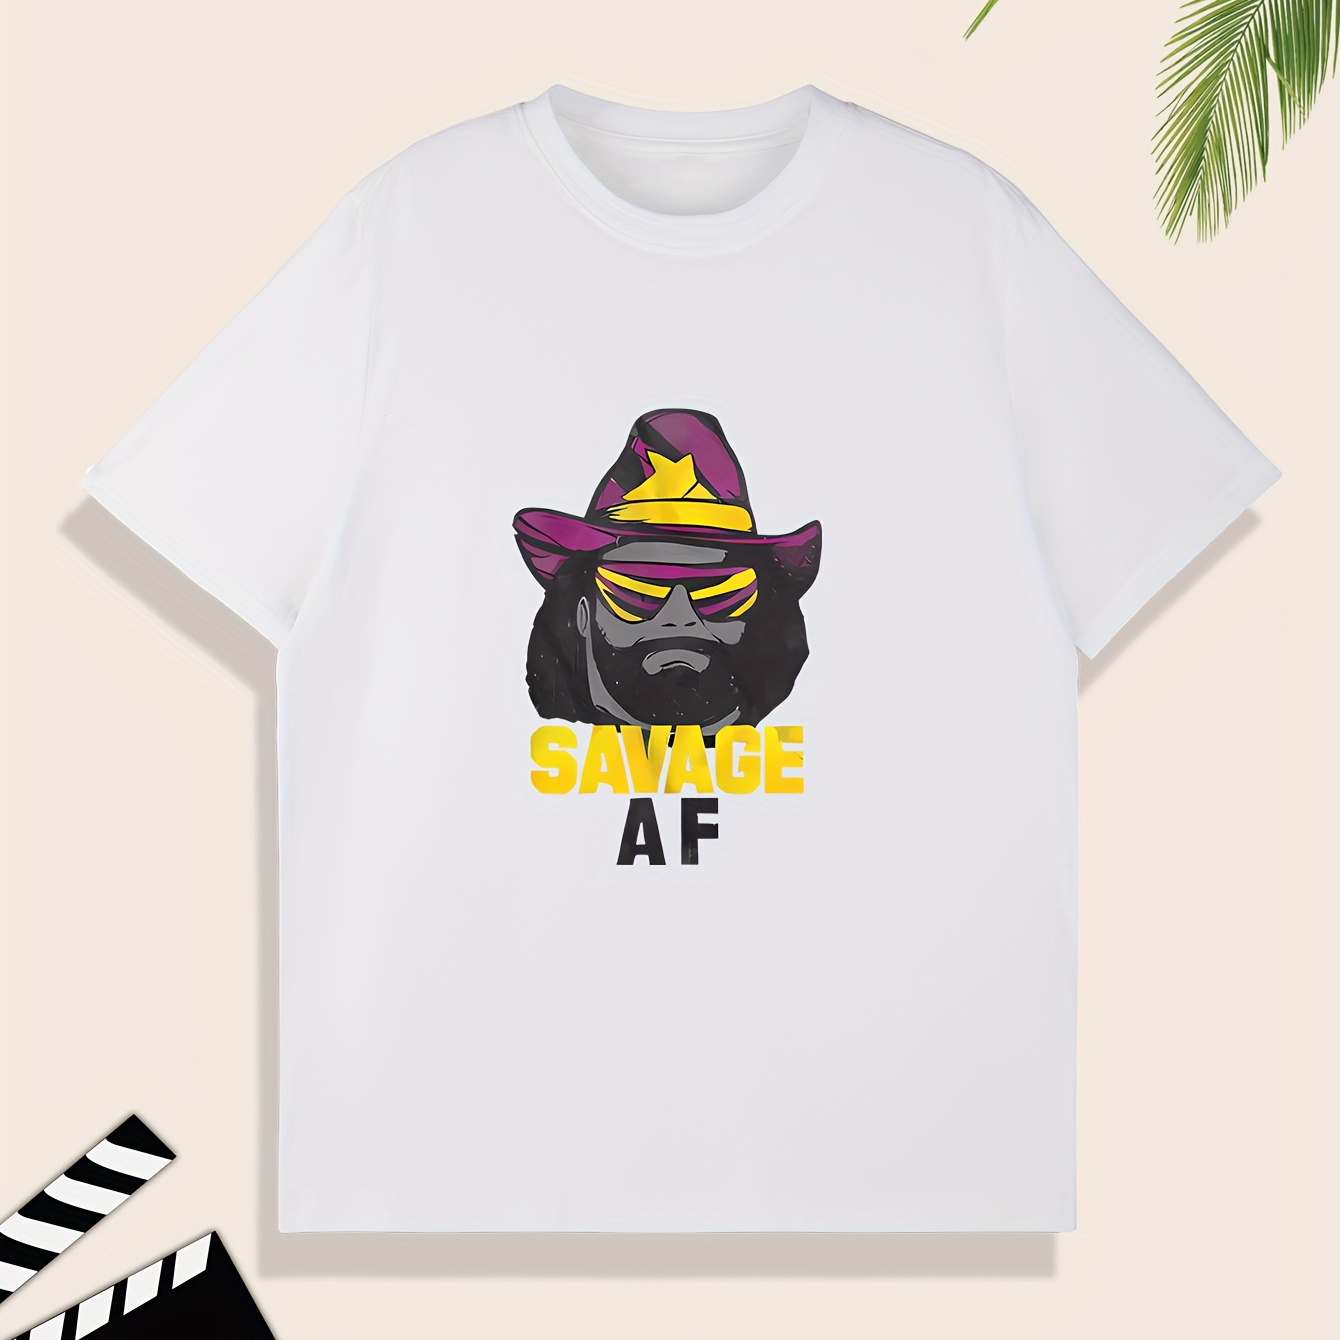 

Male Figure With Hat And Sunglasses Pattern And Letter Print "savage" Crew Neck And Short Sleeve T-shirt, Casual And Stylish Tops For Men's Summer Outdoors Wear, Tees For Men